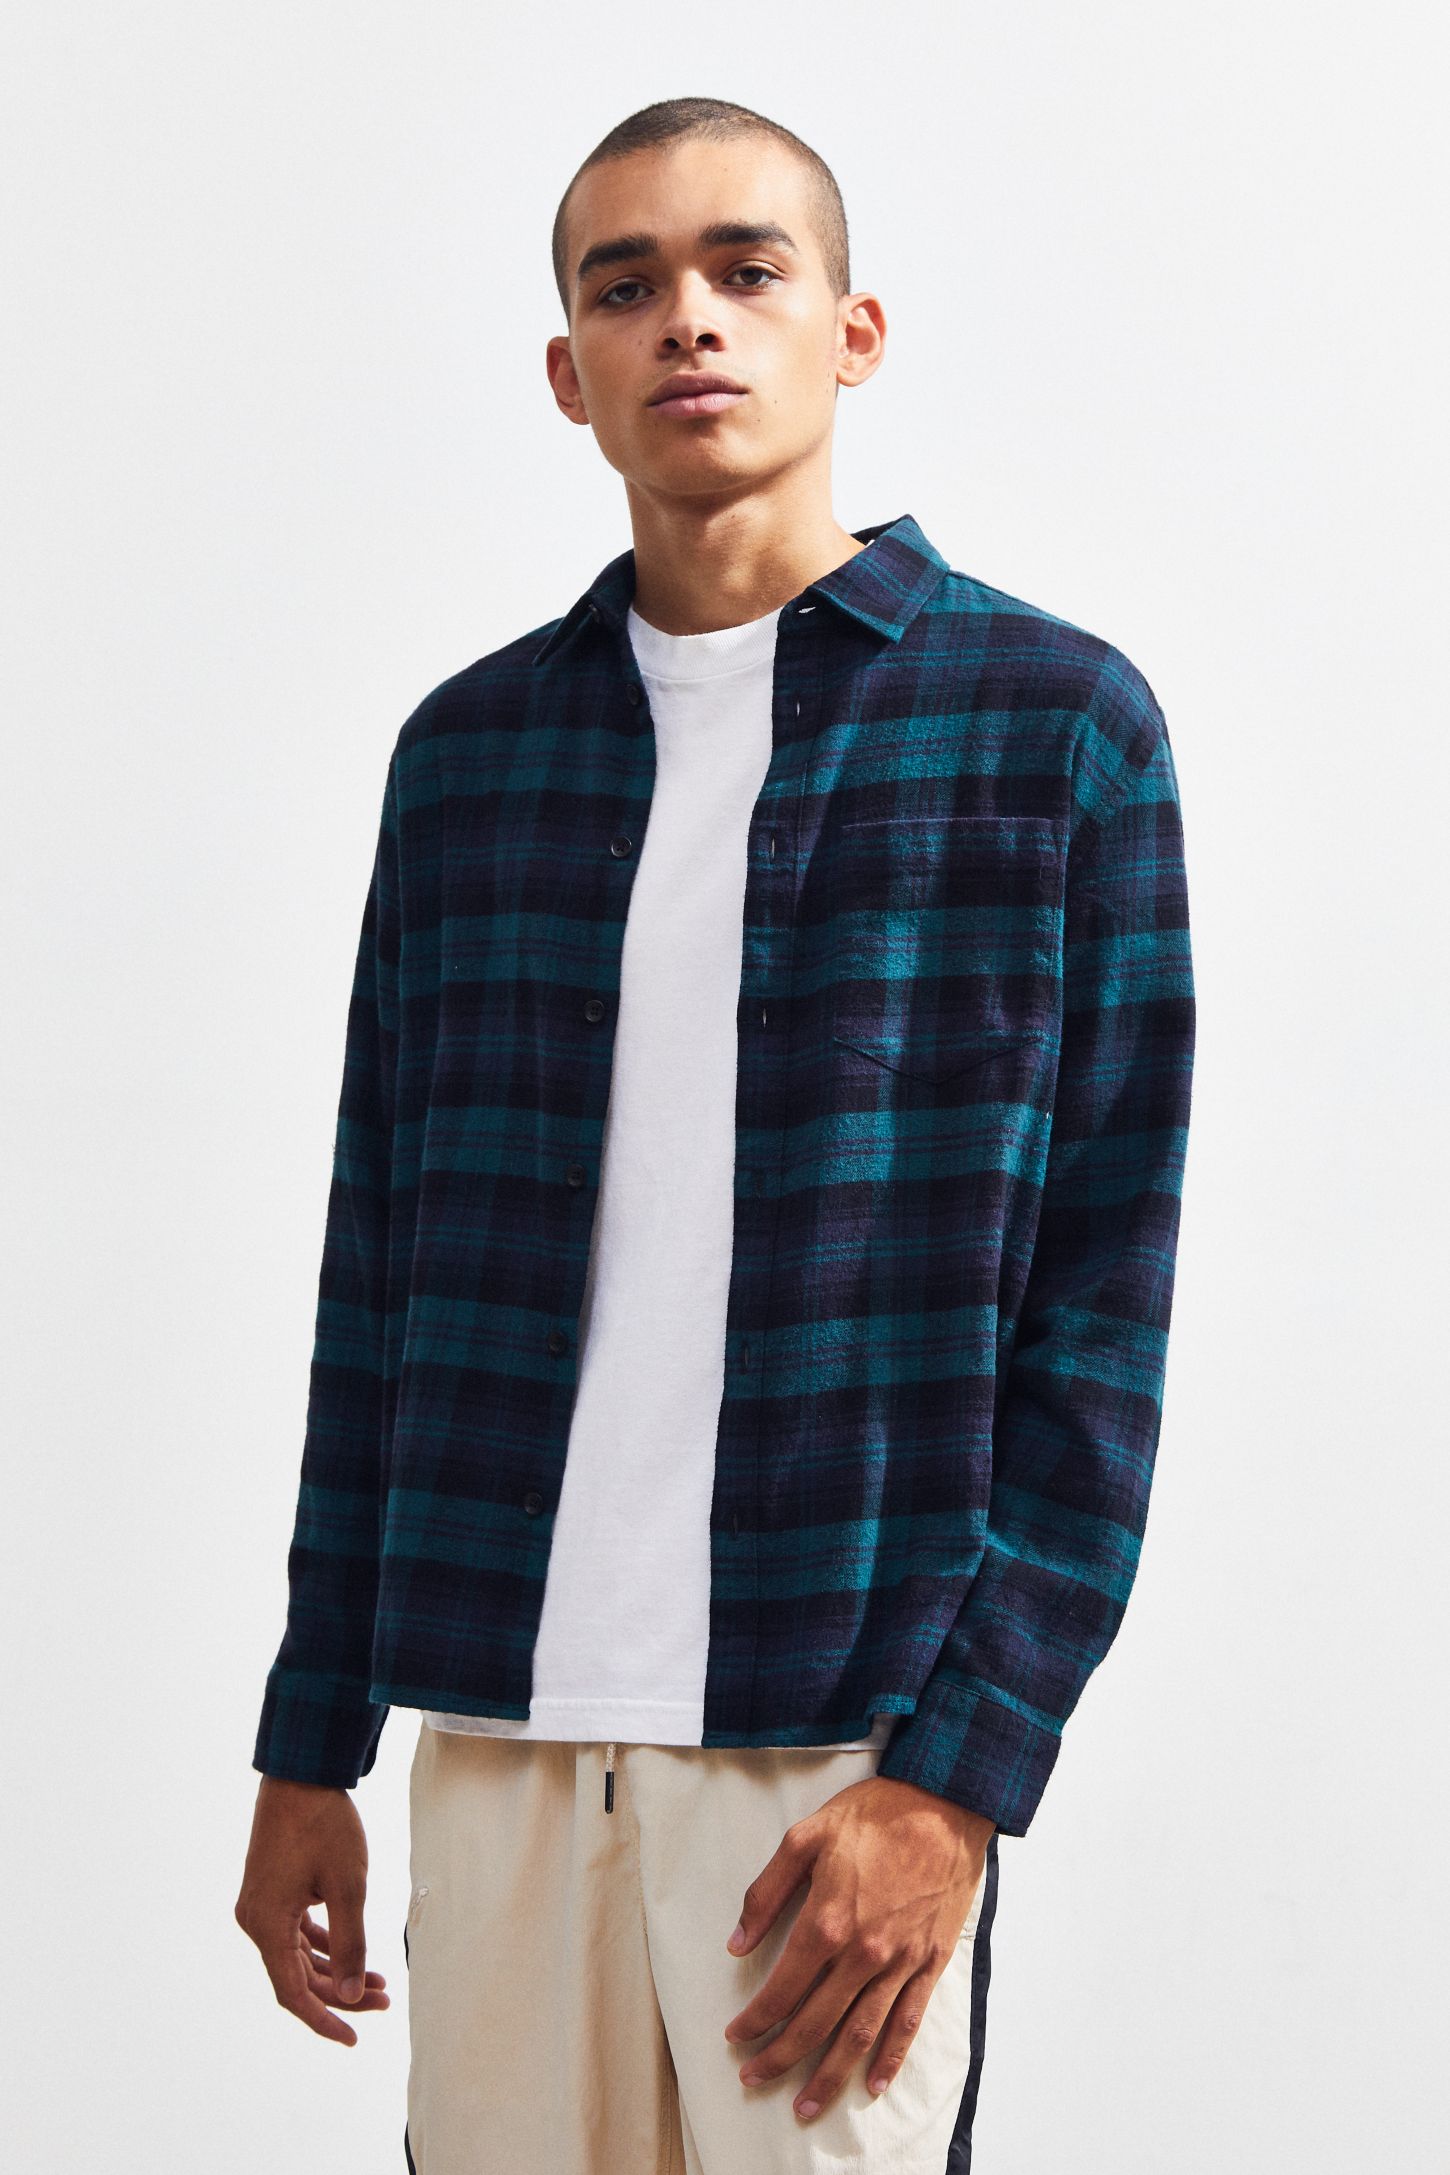 Urban Outfitters Clothes Men - Clothes Size